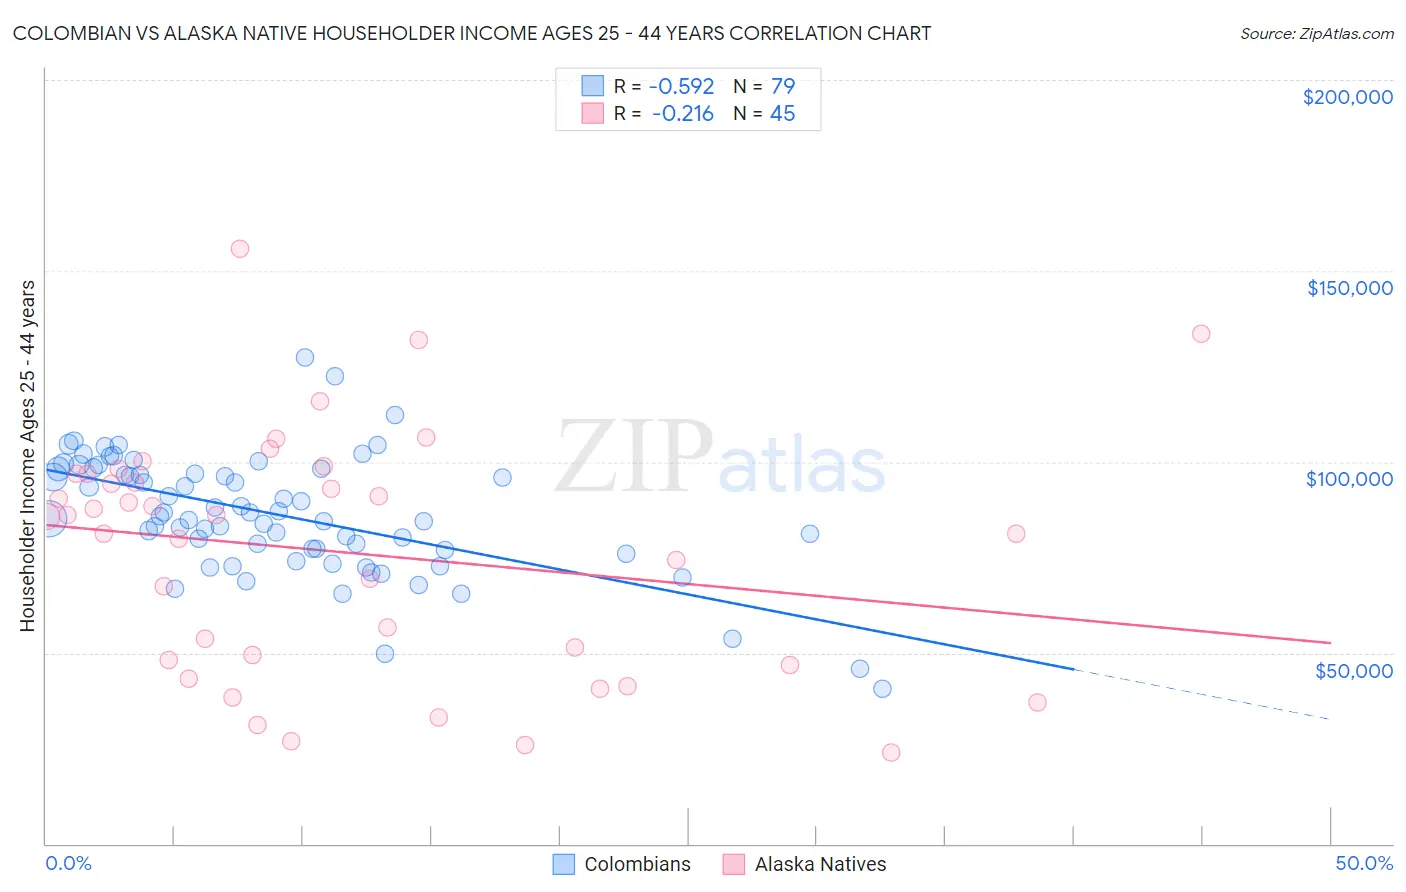 Colombian vs Alaska Native Householder Income Ages 25 - 44 years